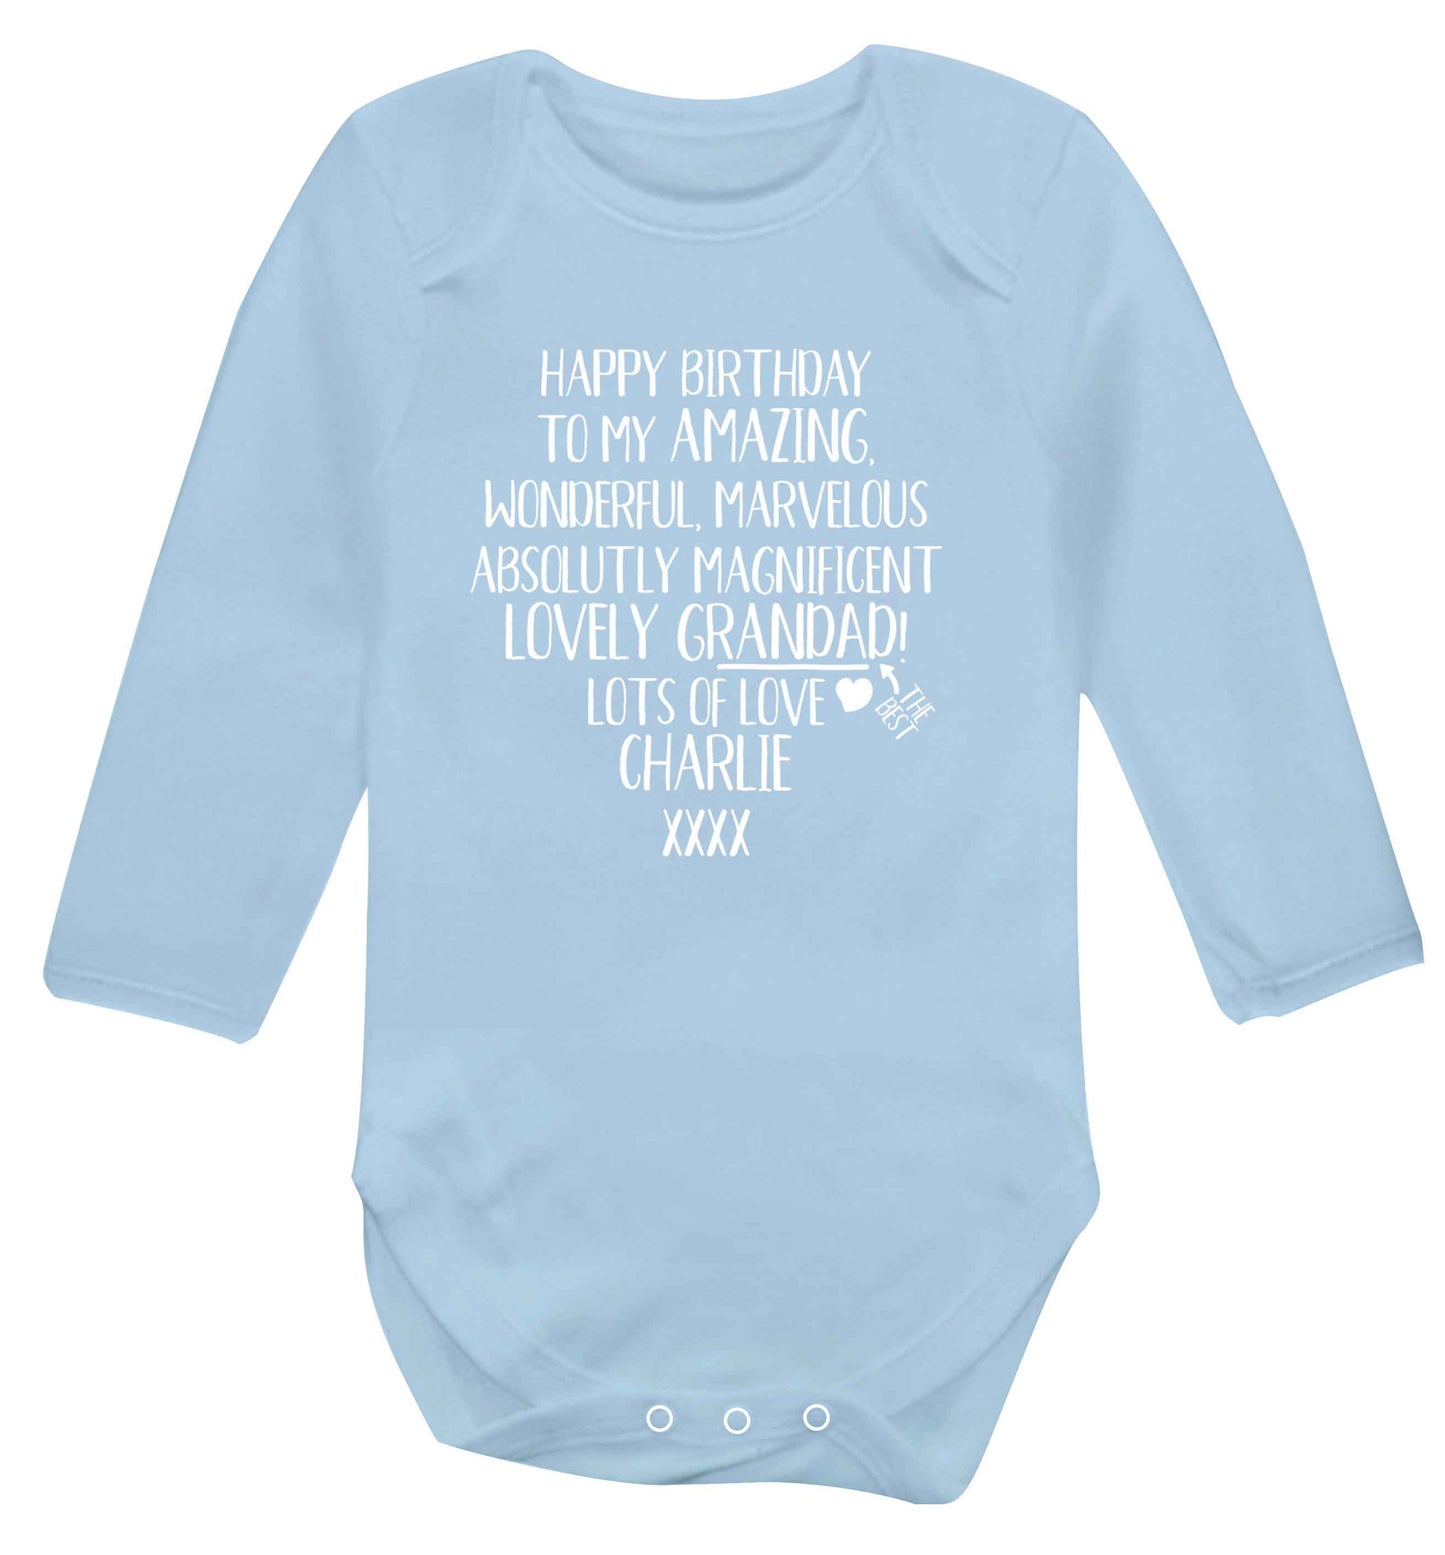 Personalised happy birthday to my amazing, wonderful, lovely grandad Baby Vest long sleeved pale blue 6-12 months